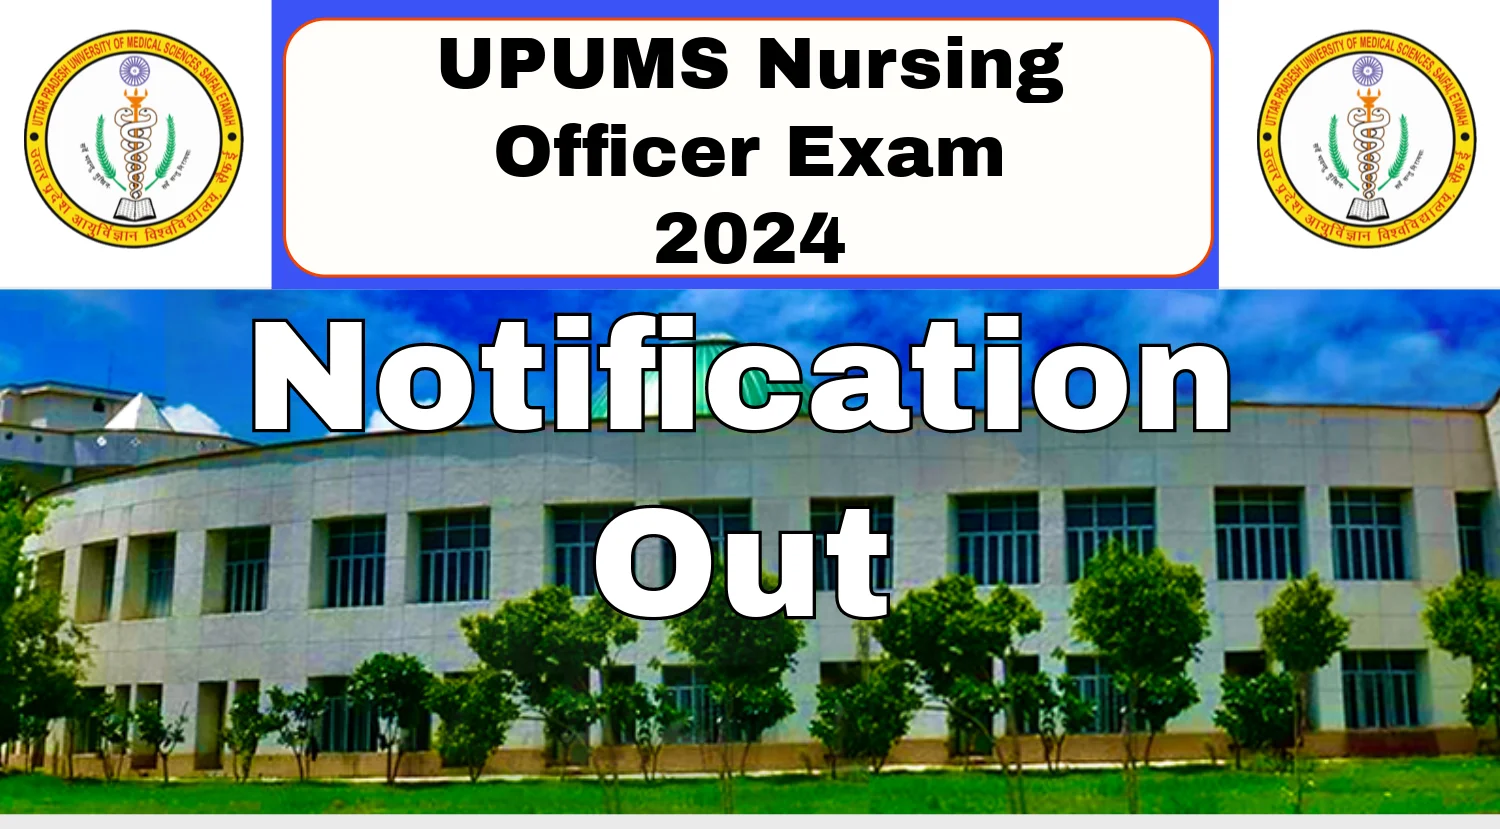 UPUMS Nursing Officer Recruitment 2024 Notification Out, Check Eligibility, Vacancy and How to Apply Now